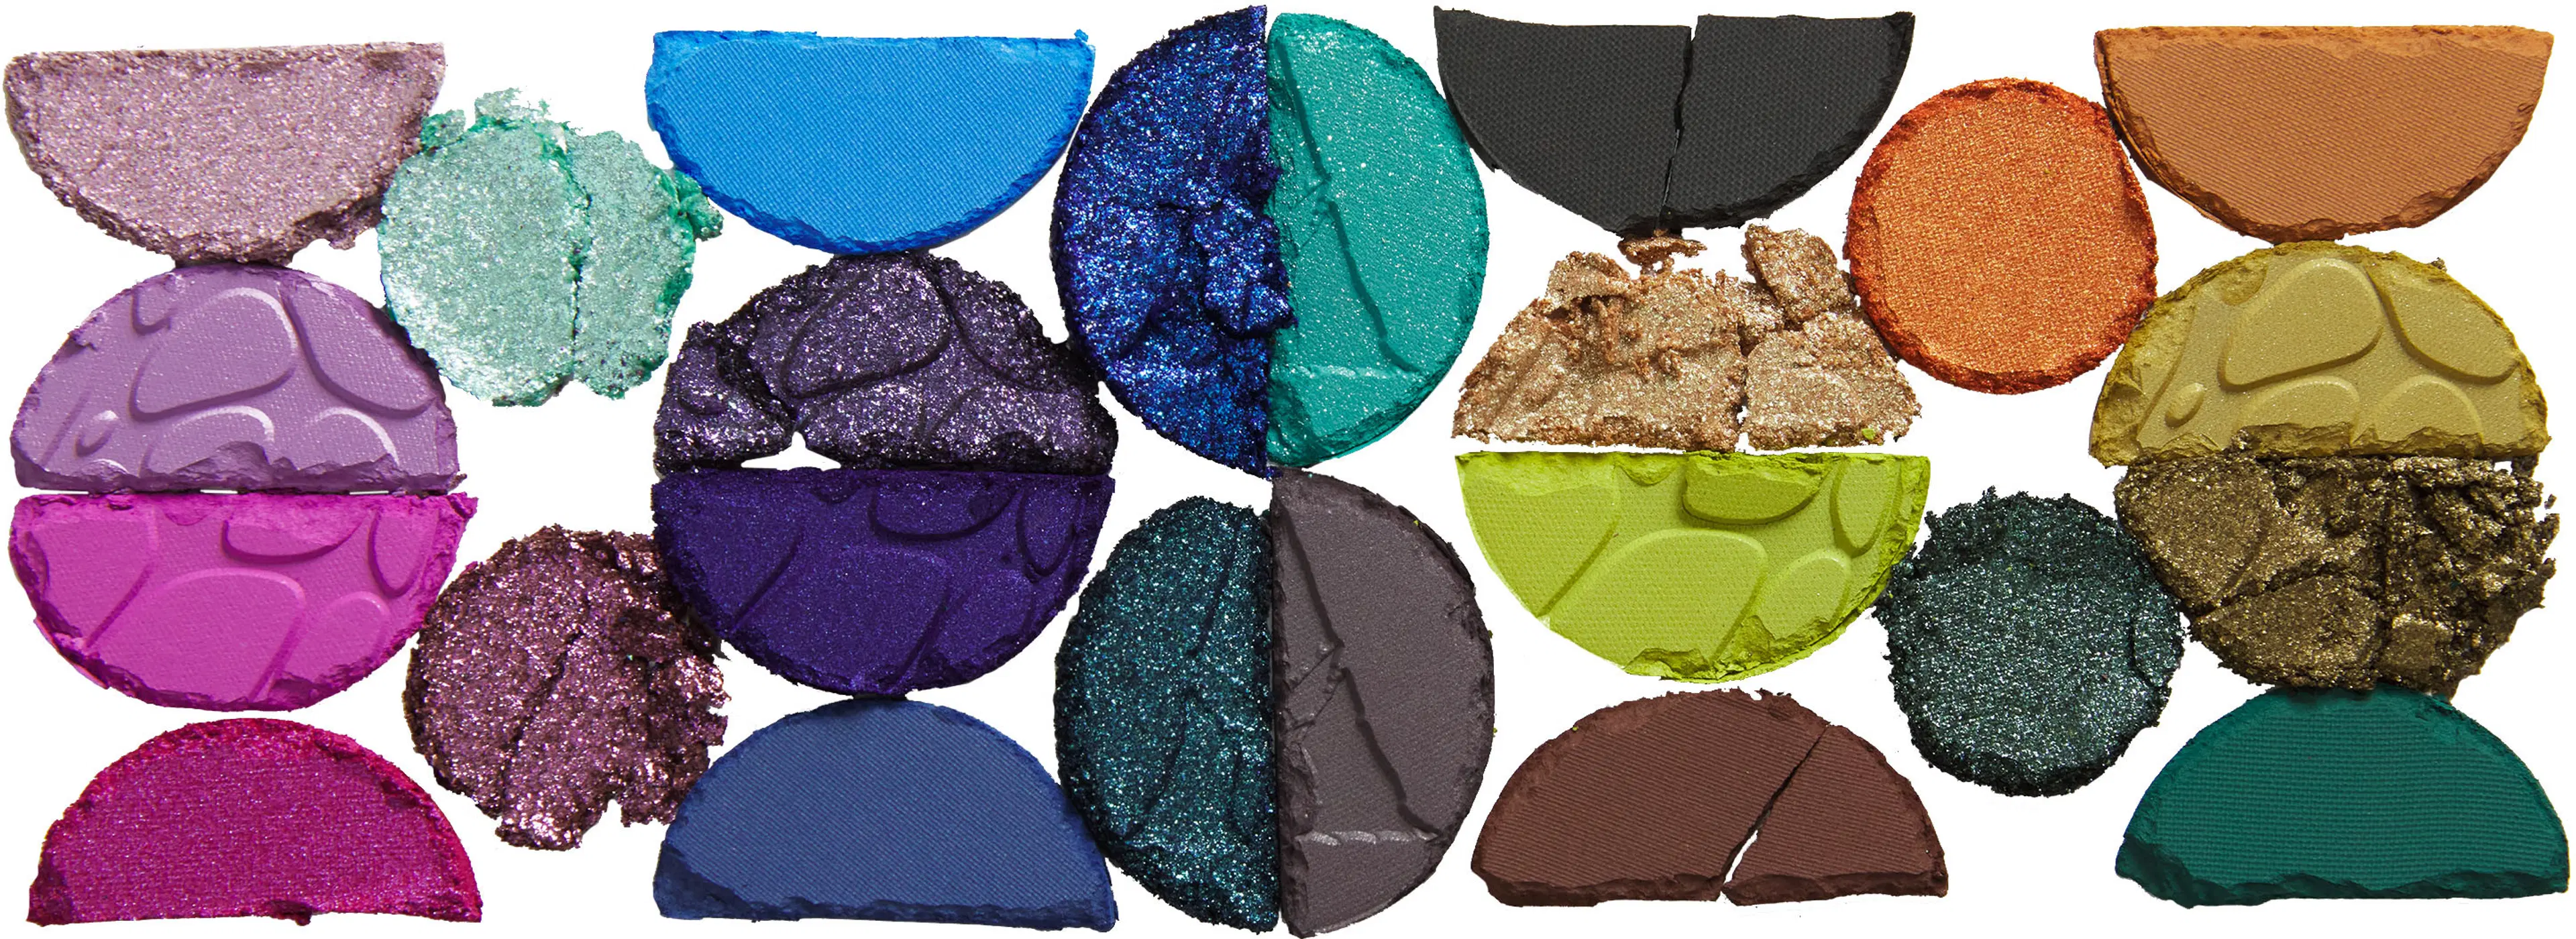 NYX Professional Makeup Avatar 2 Color Palette luomiväripaletti 17,8 g